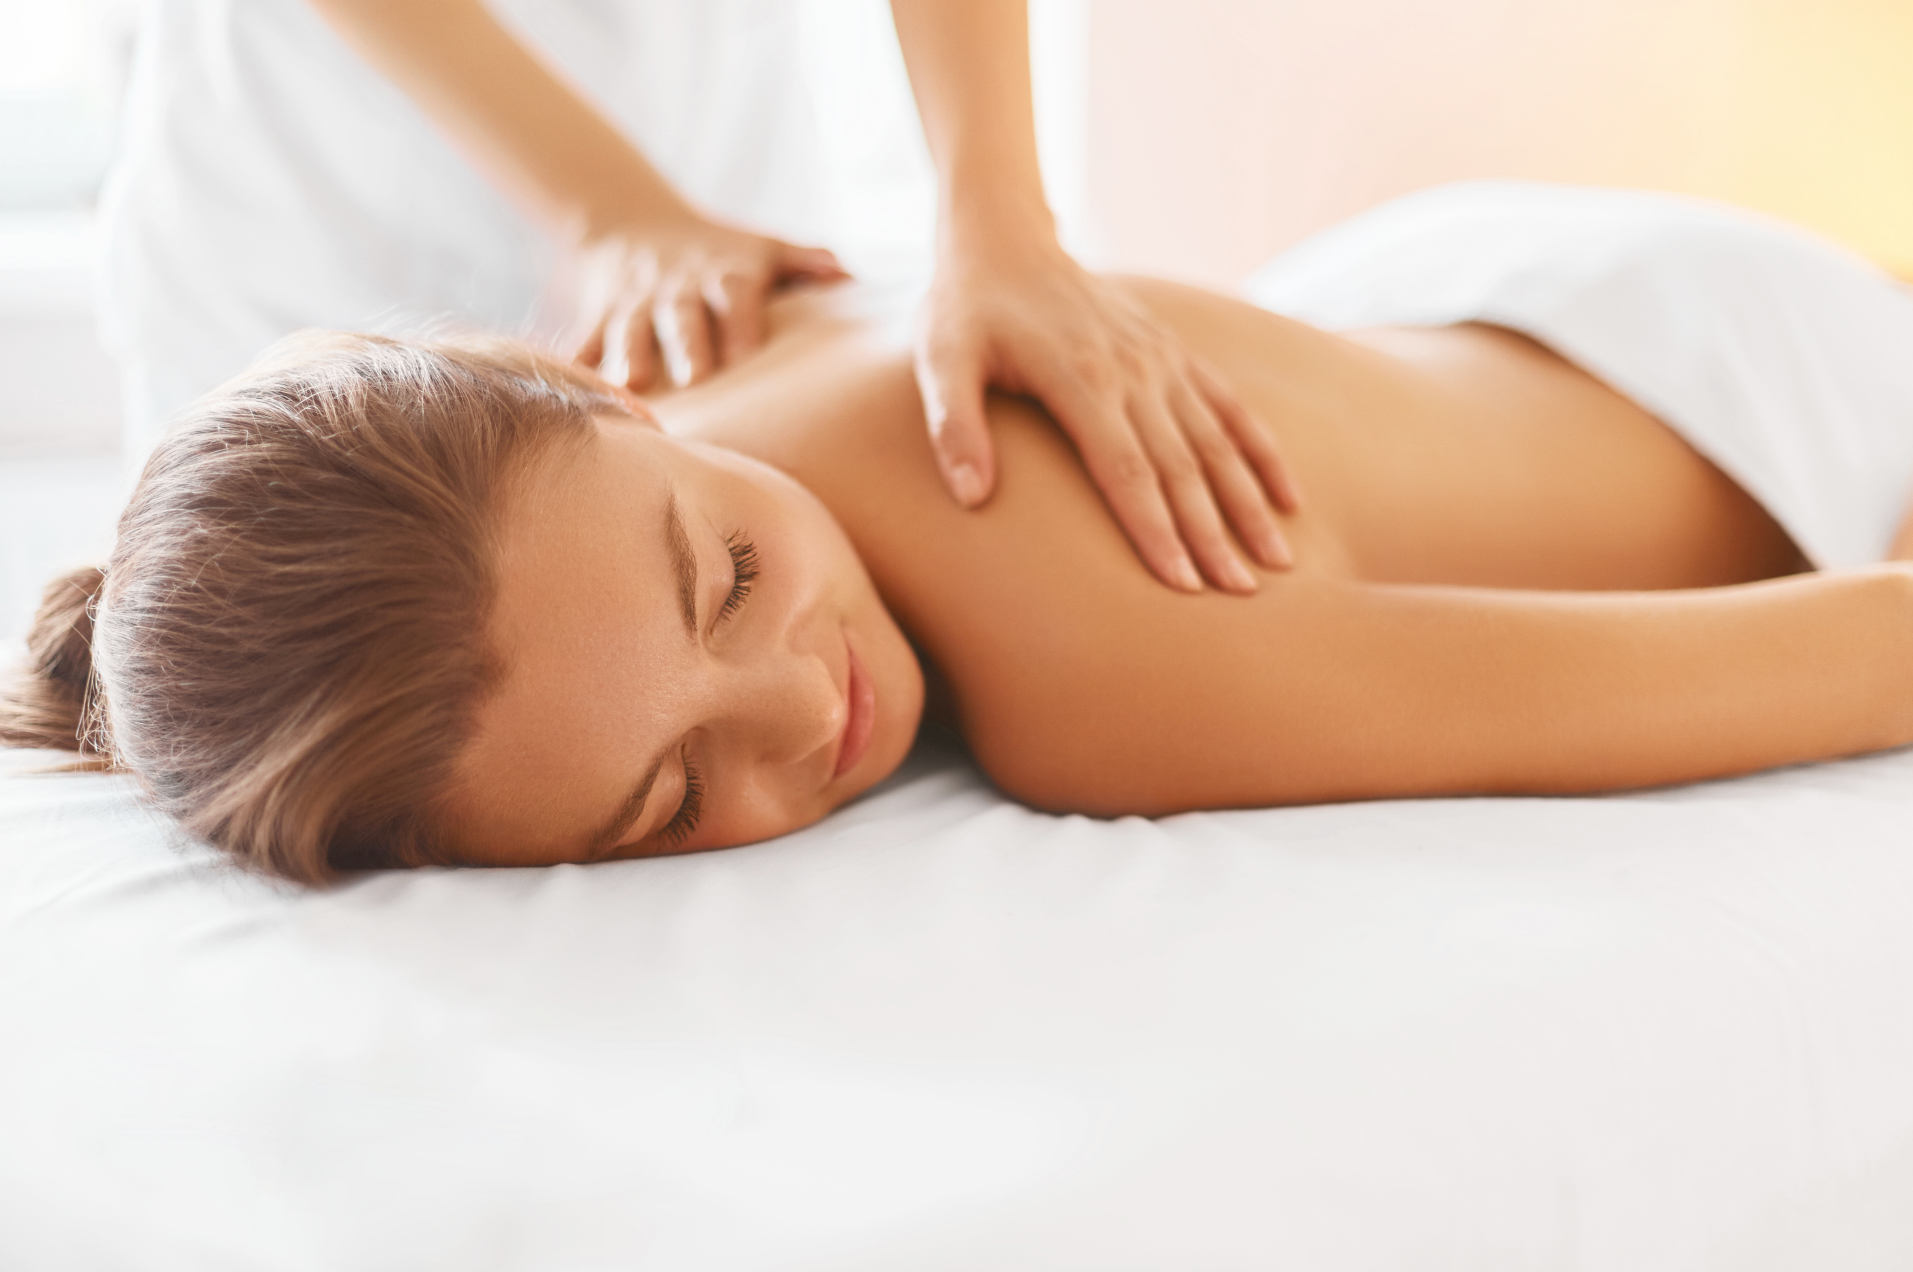   MASSAGE THERAPY    LEARN MORE  